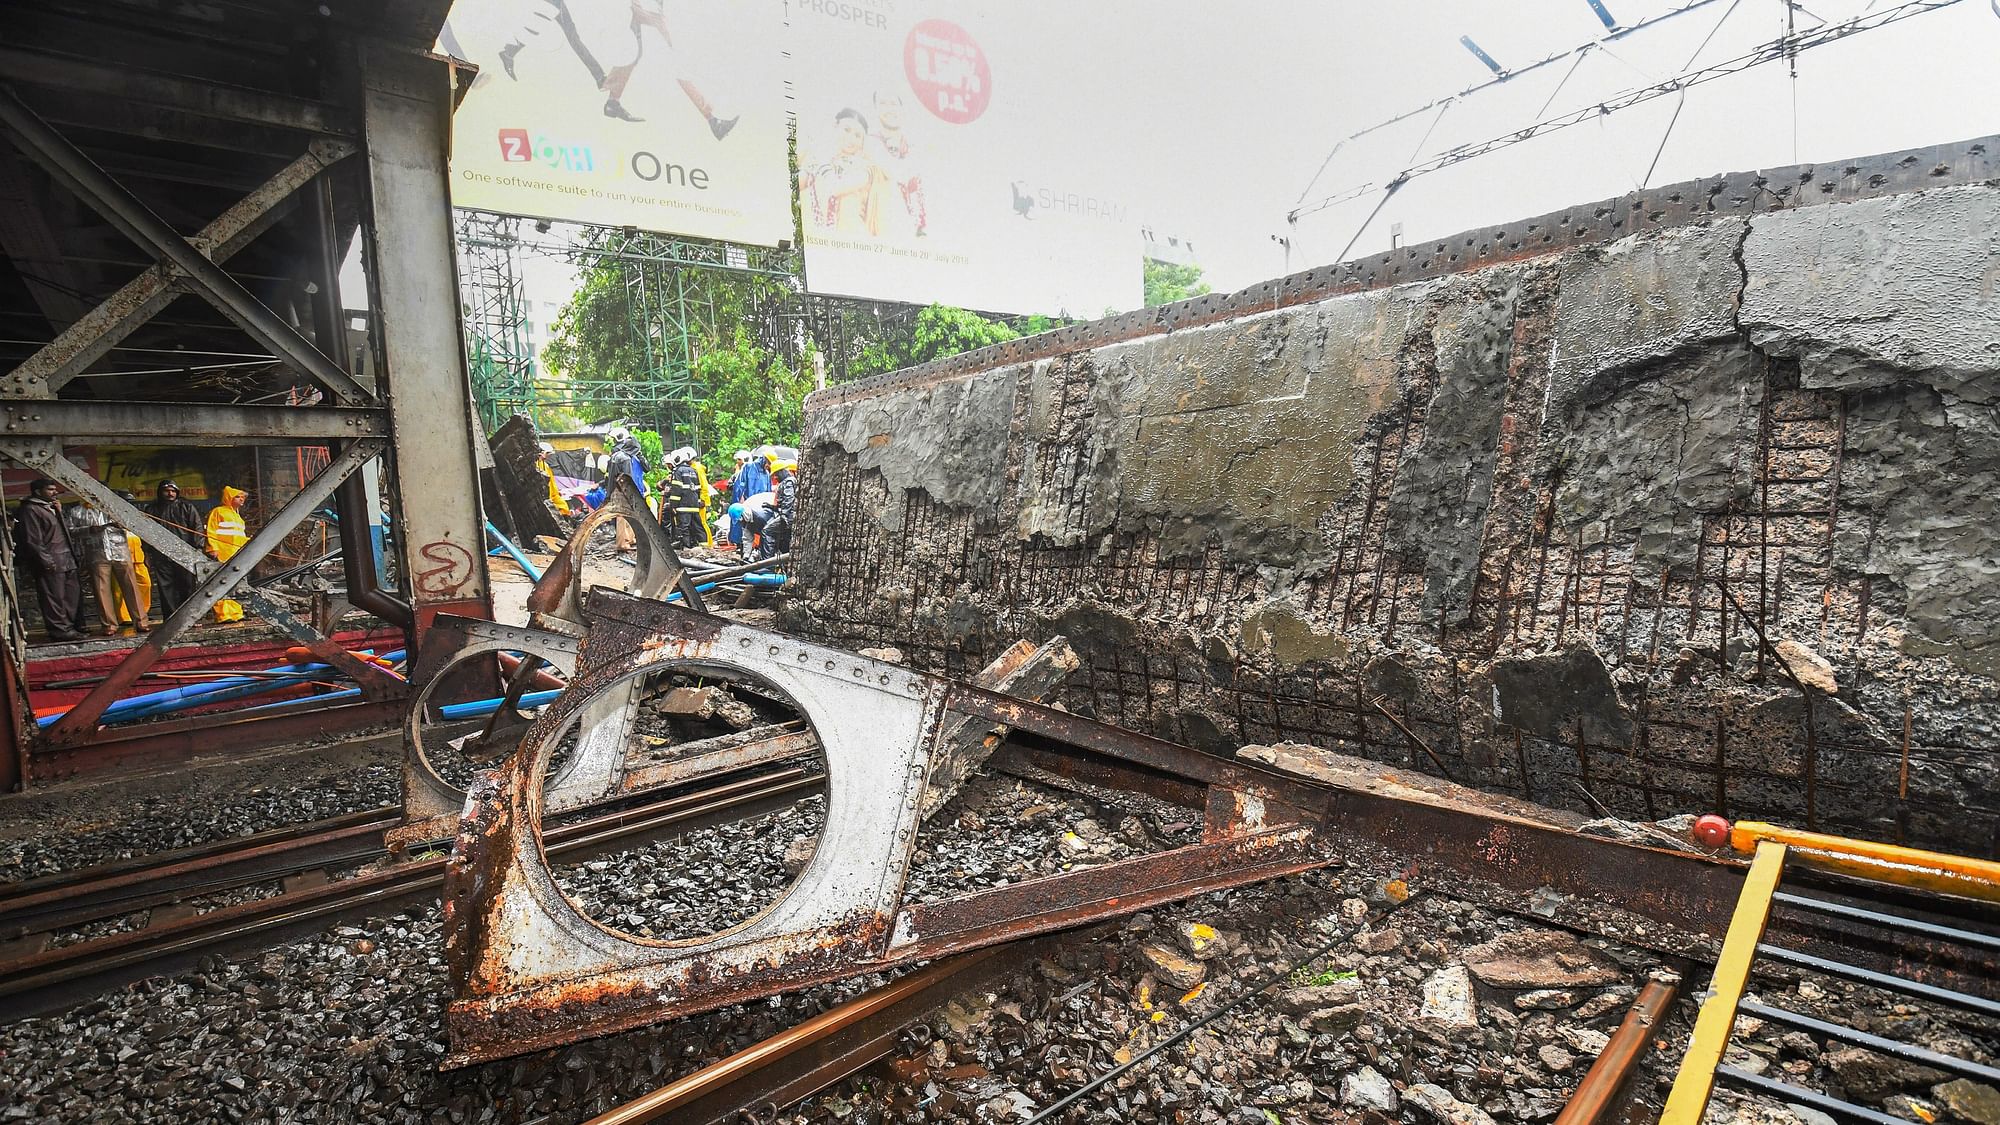 A part of the Gokhale bridge in Mumbai’s Andheri collapsed on 3 July 